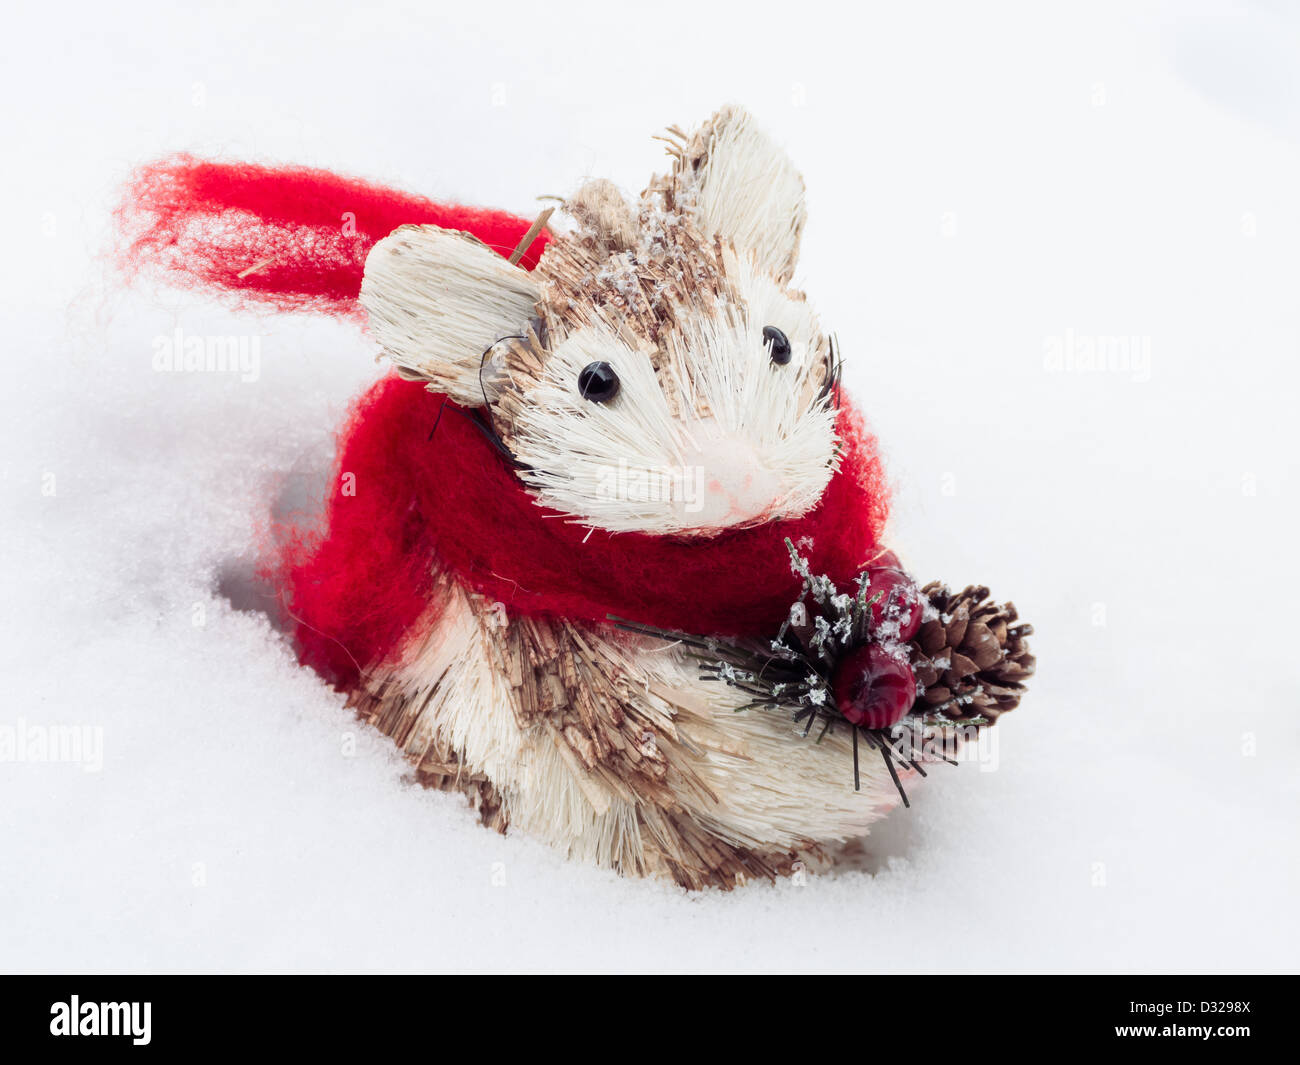 Mouse in Snow Stock Photo